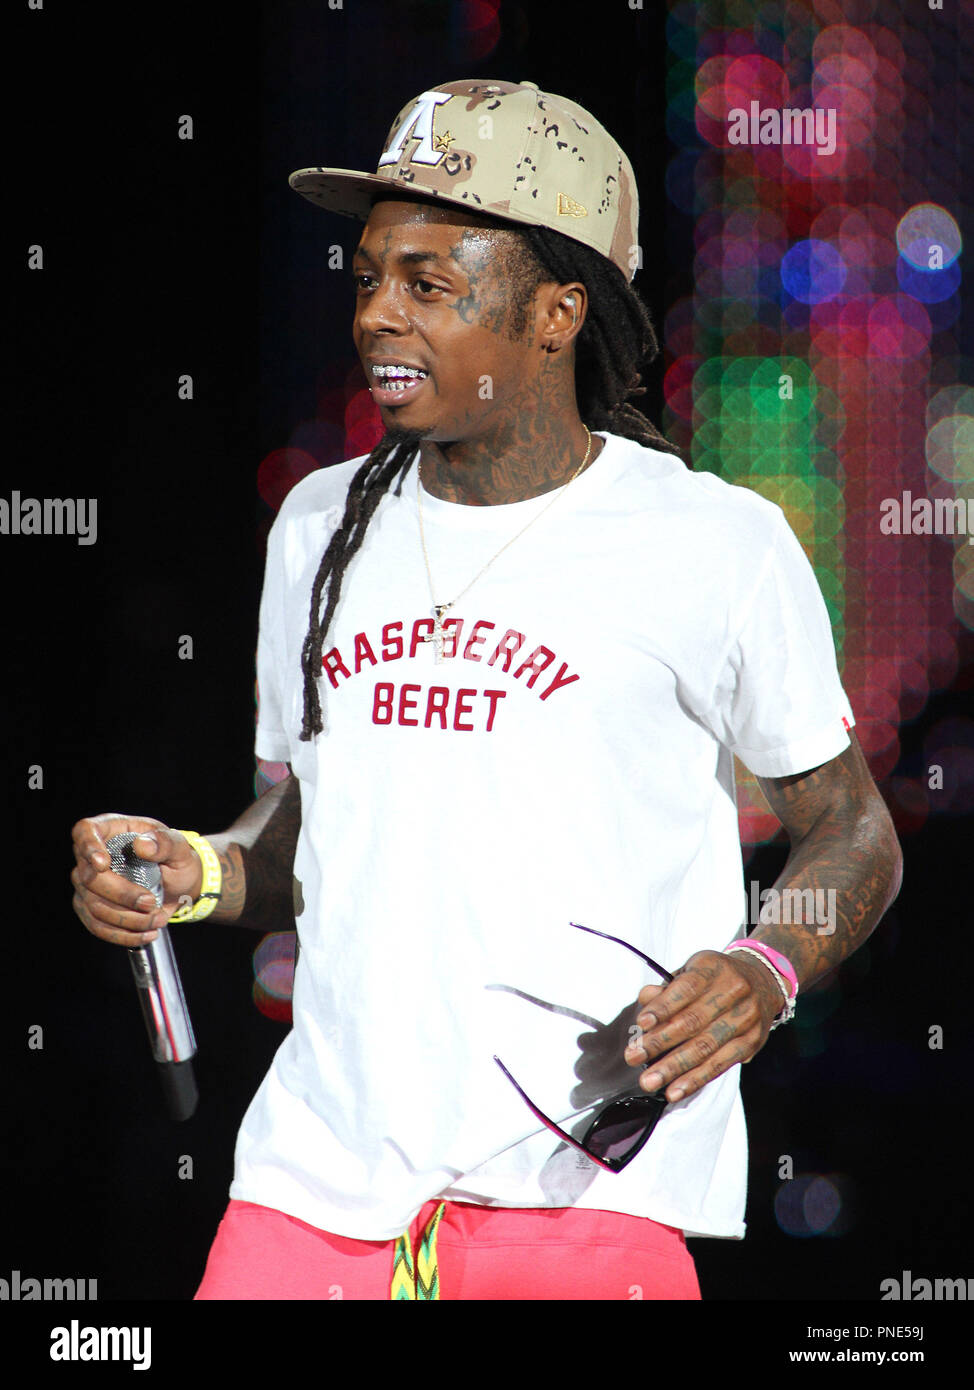 Lil Wayne performs in concert at the Cruzan Amphitheater in West Palm Beach, Florida on August 2, 2011. Stock Photo